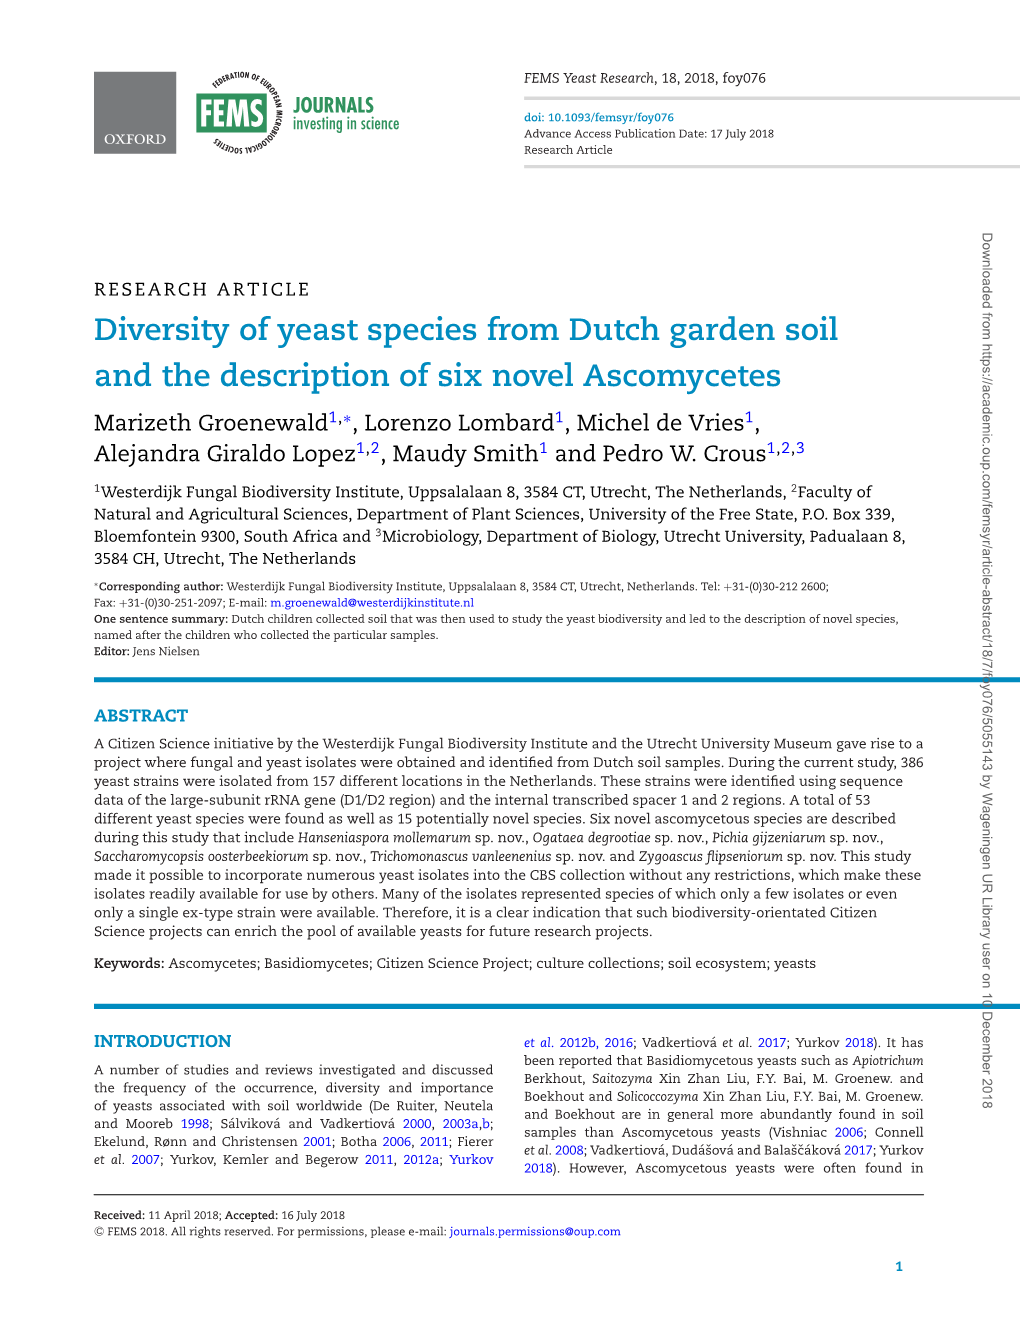 Diversity of Yeast Species from Dutch Garden Soil and the Description Of